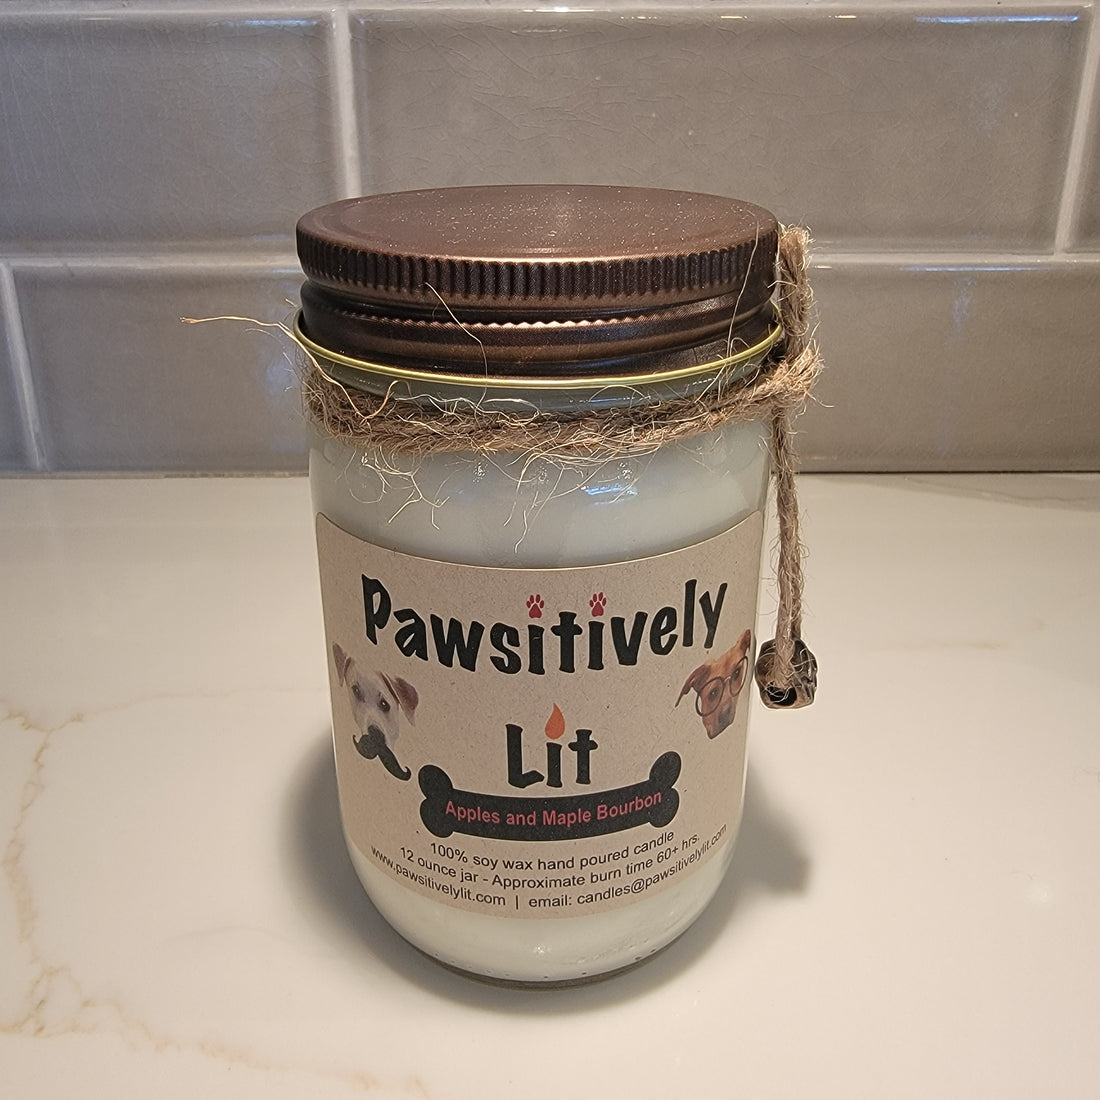 Apple Maple Bourbon Scented Pawsitively Lit 100% Soy Wax Mason Jar Candle